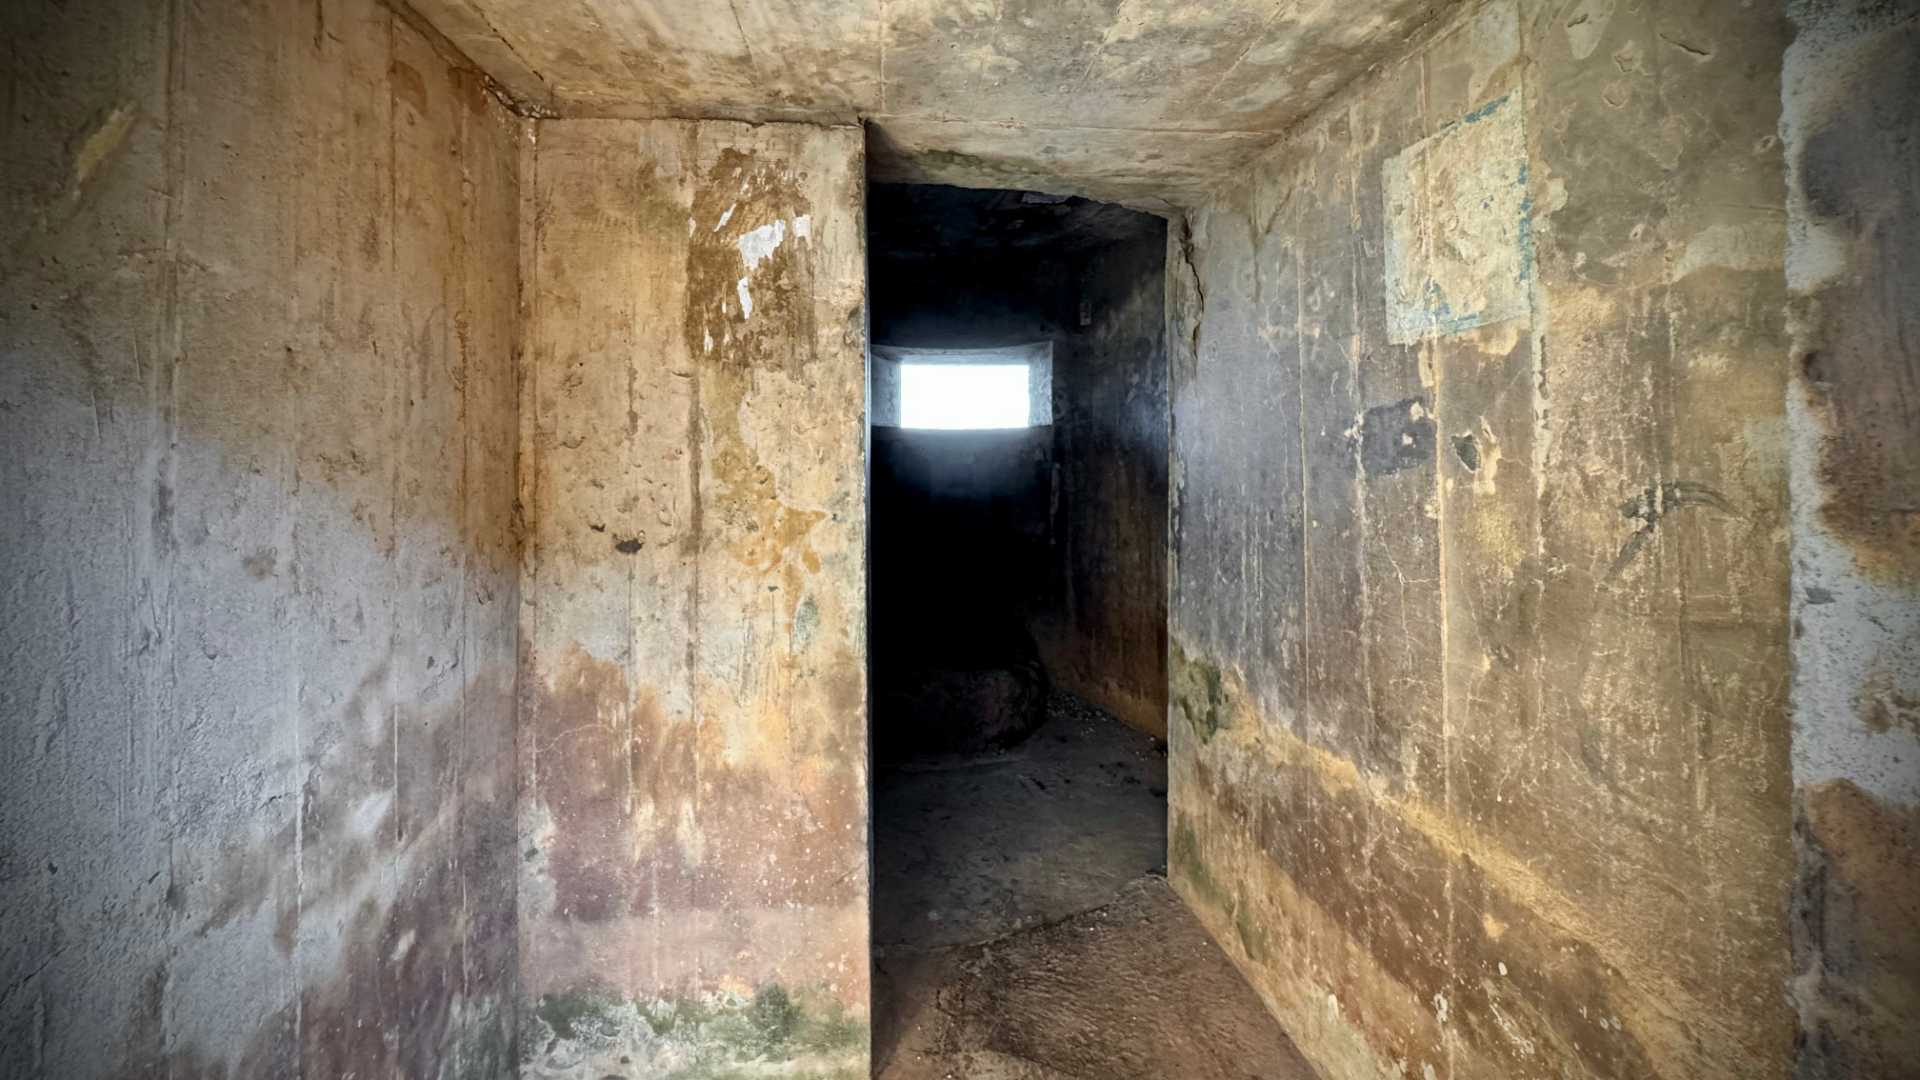 Wide-angle view of the inside of a concrete bunker-like pillbox.